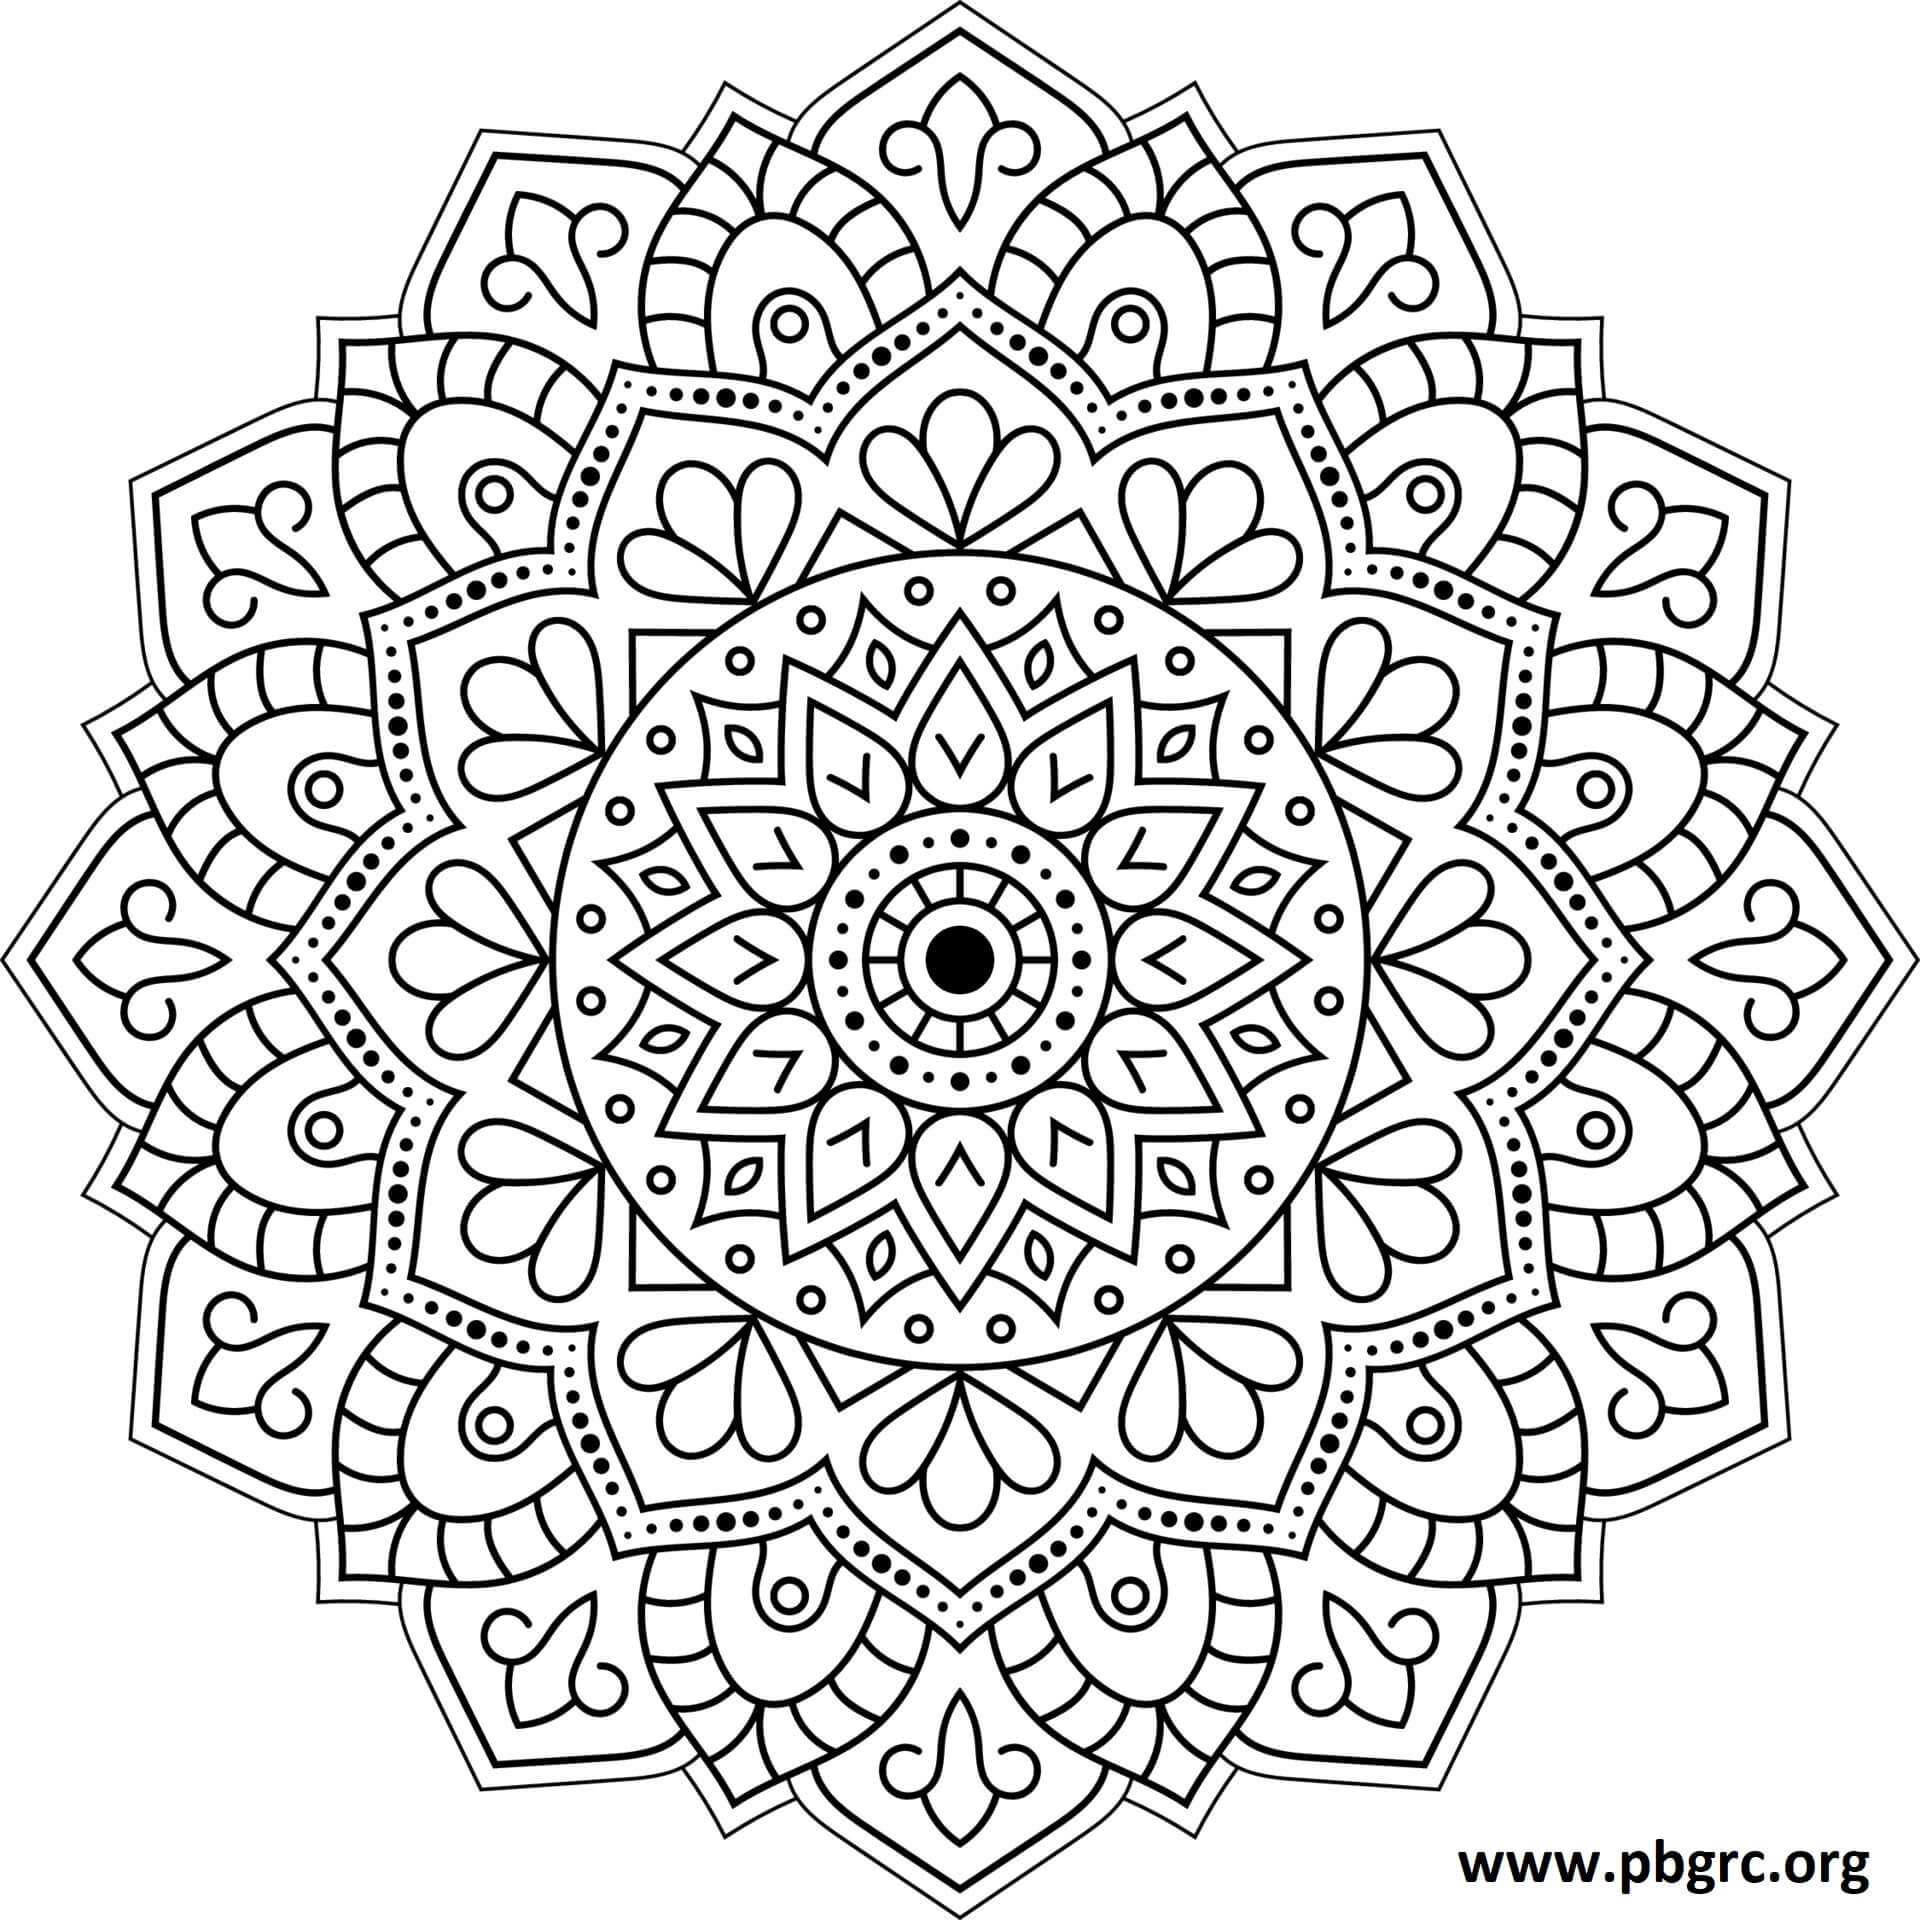 Mandala Coloring Pages for Mindfulness and Meditation